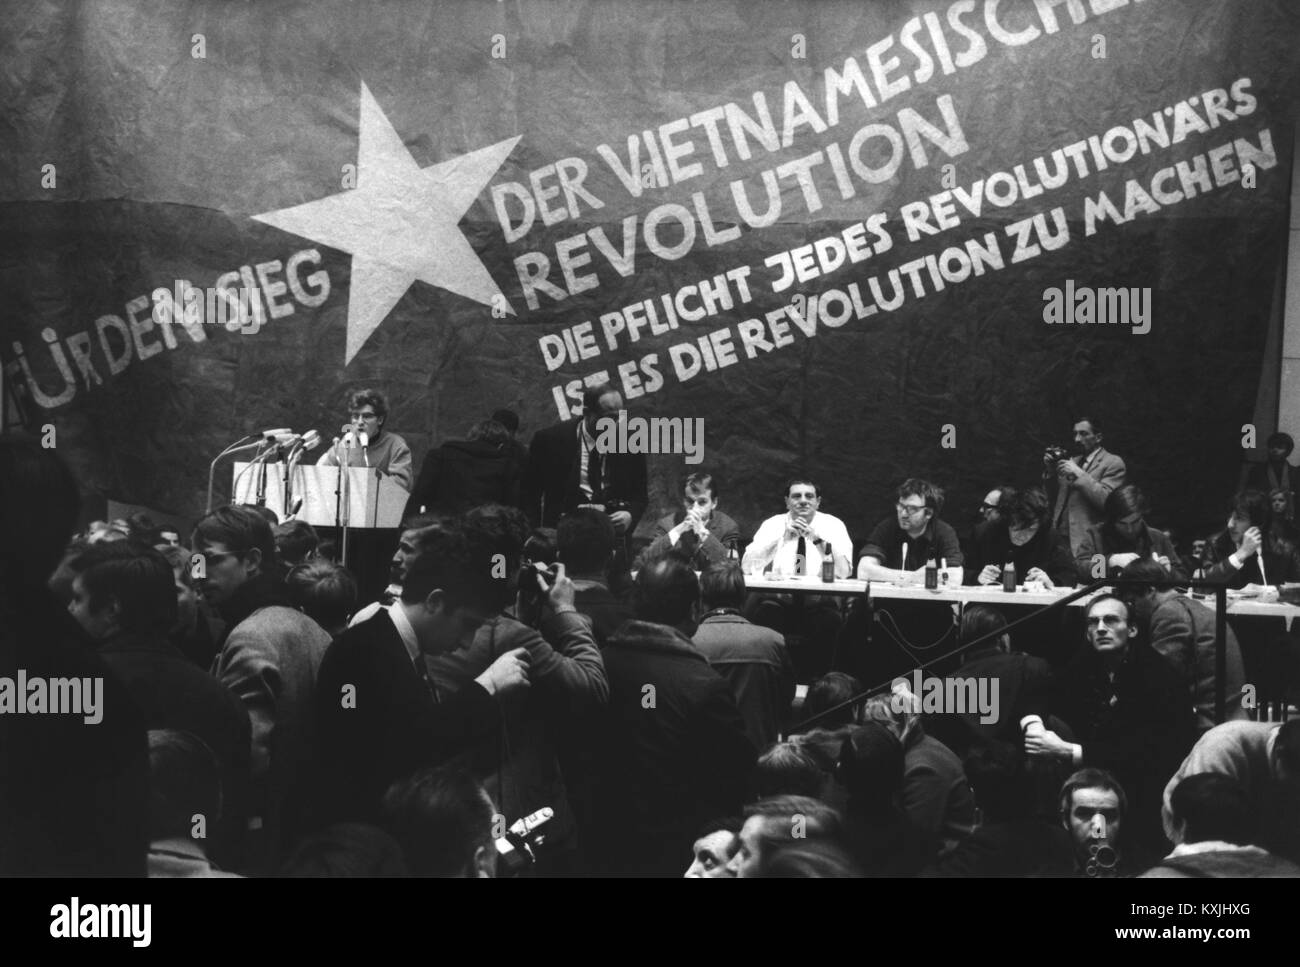 View of the speaker's podium at the 'International Vietnam Conference' in Berlin in the crowded auditorium of the Technische Universität during the opening session on February 17,1968. 3000 young people followed the invitation of the Socialist German Student Union (SDS) and numerous left-wing socialist youth organizations of western countries. The conference was opened by Karl-Dietrich Wolff, Federal President of the SDS. | usage worldwide Stock Photo